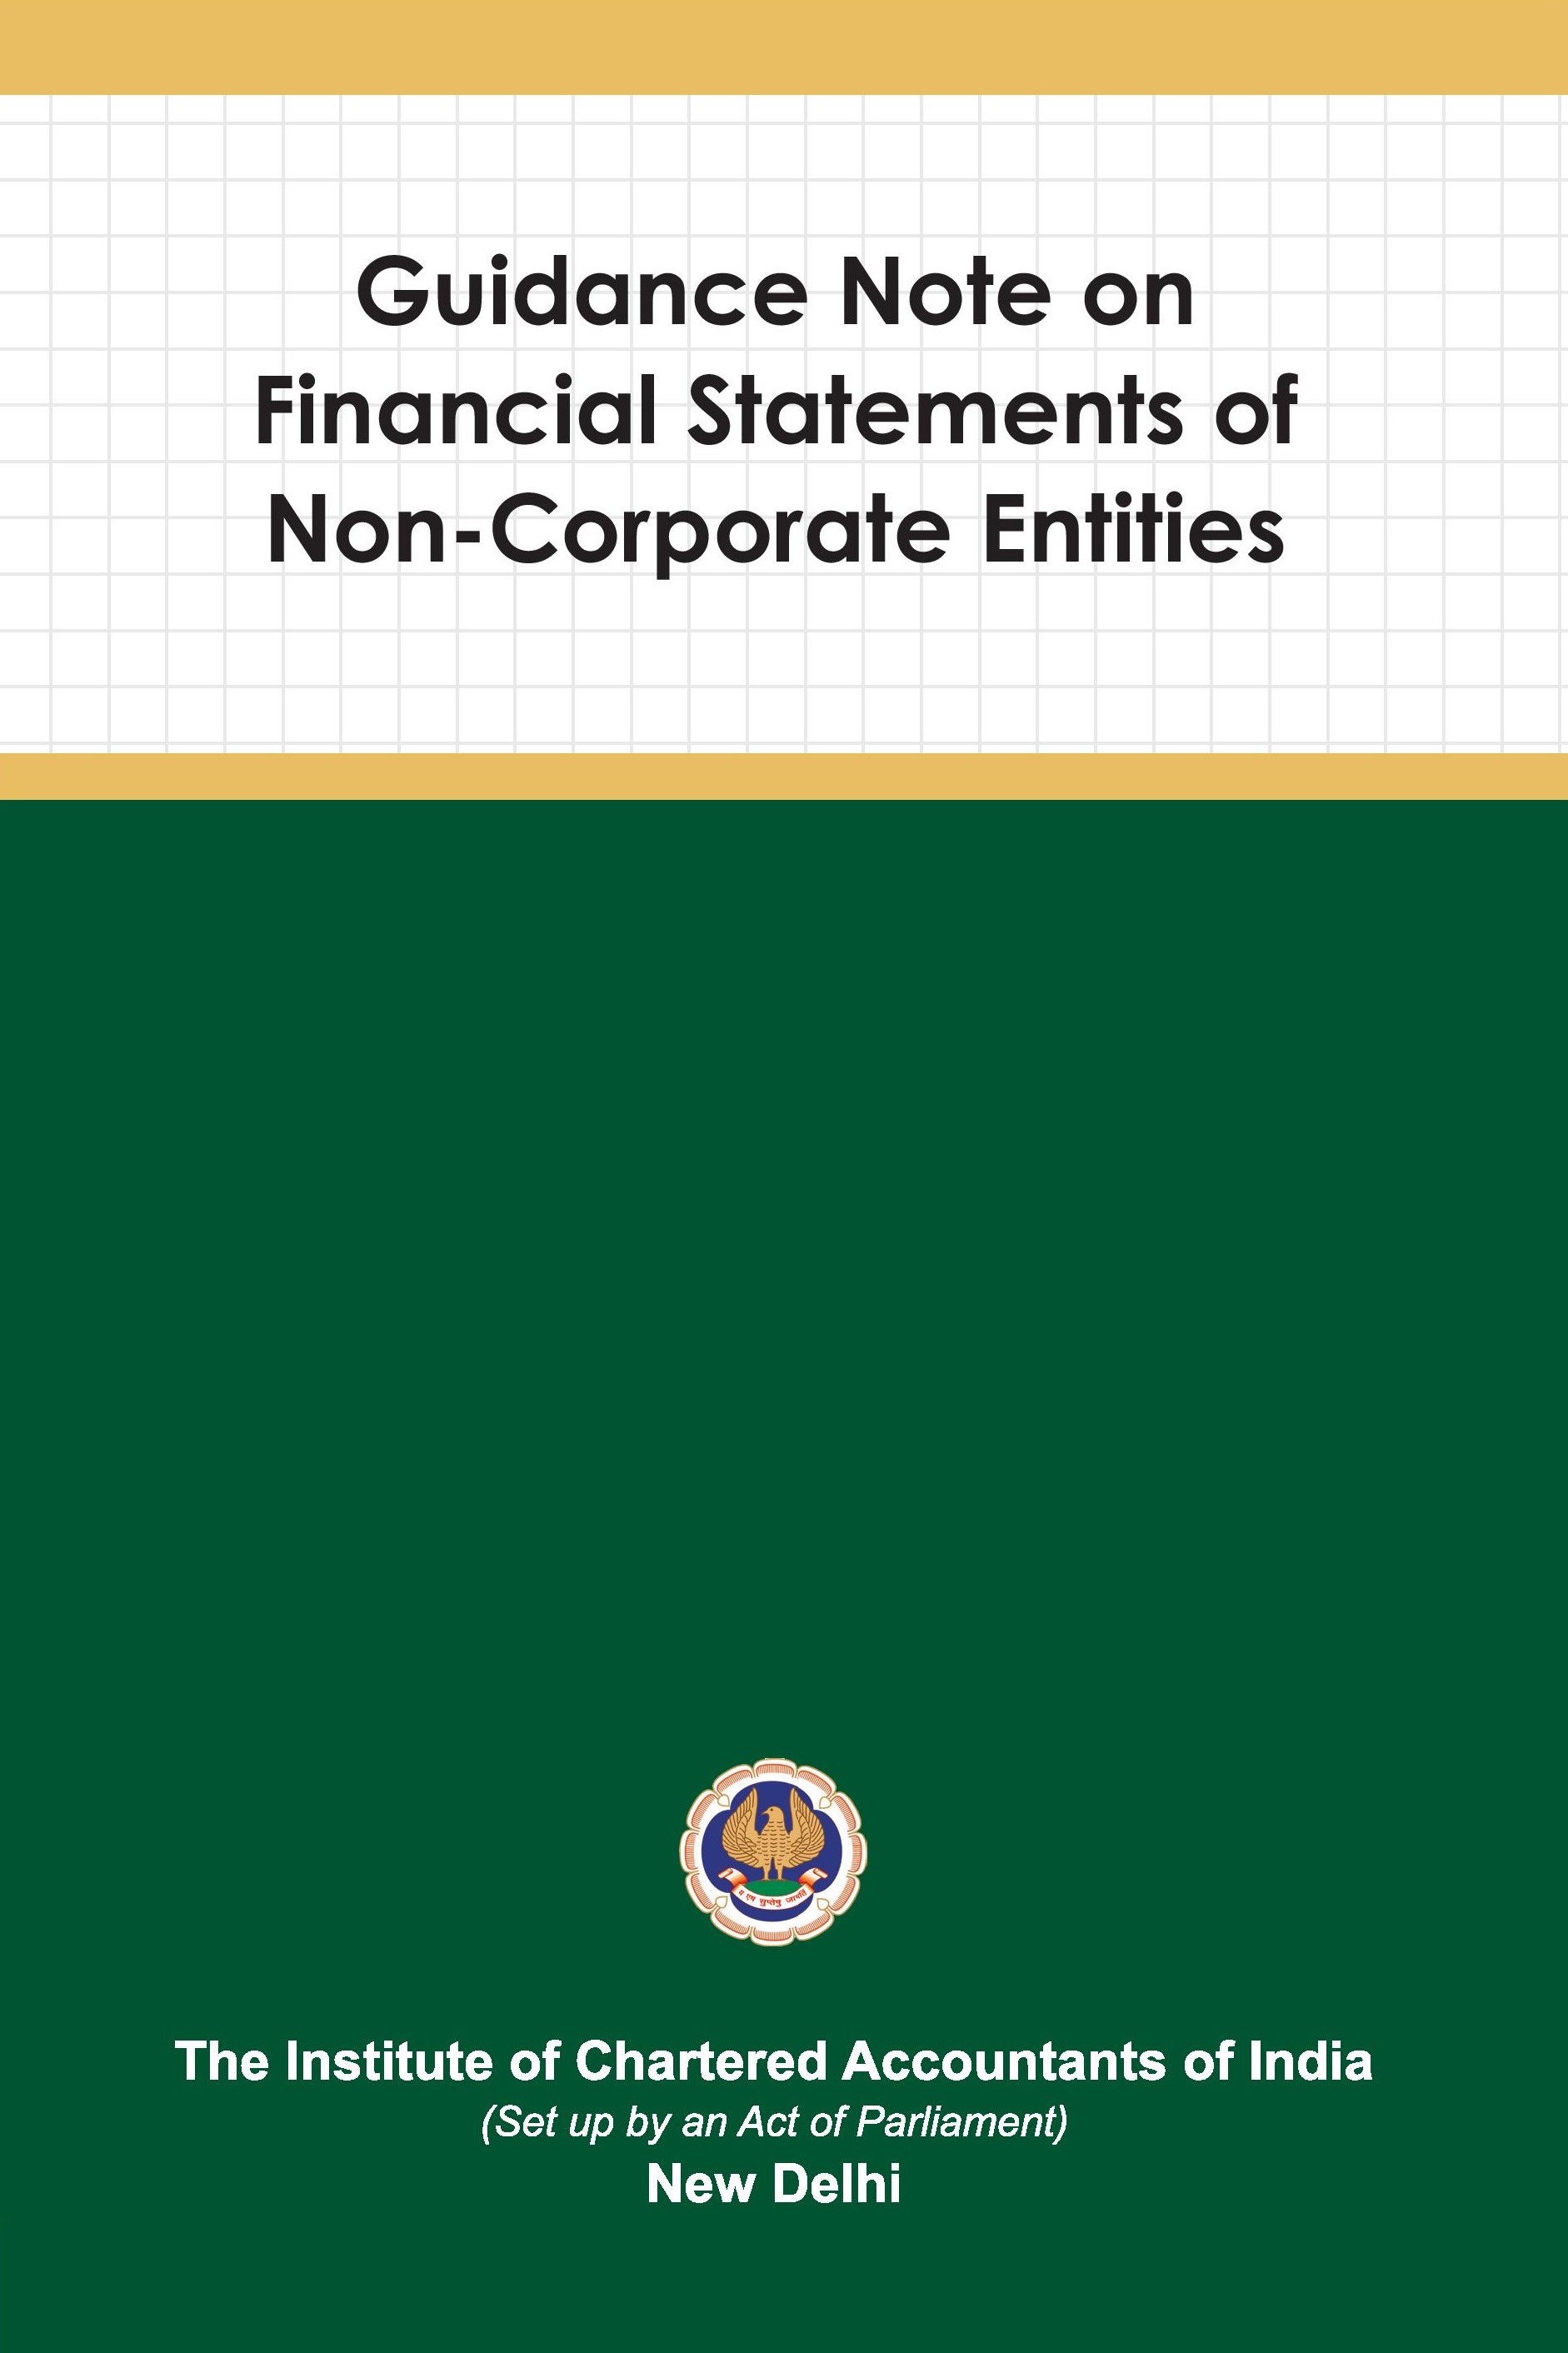 Guidance Note on Financial Statements of Non-Corporate Entities - August, 2023